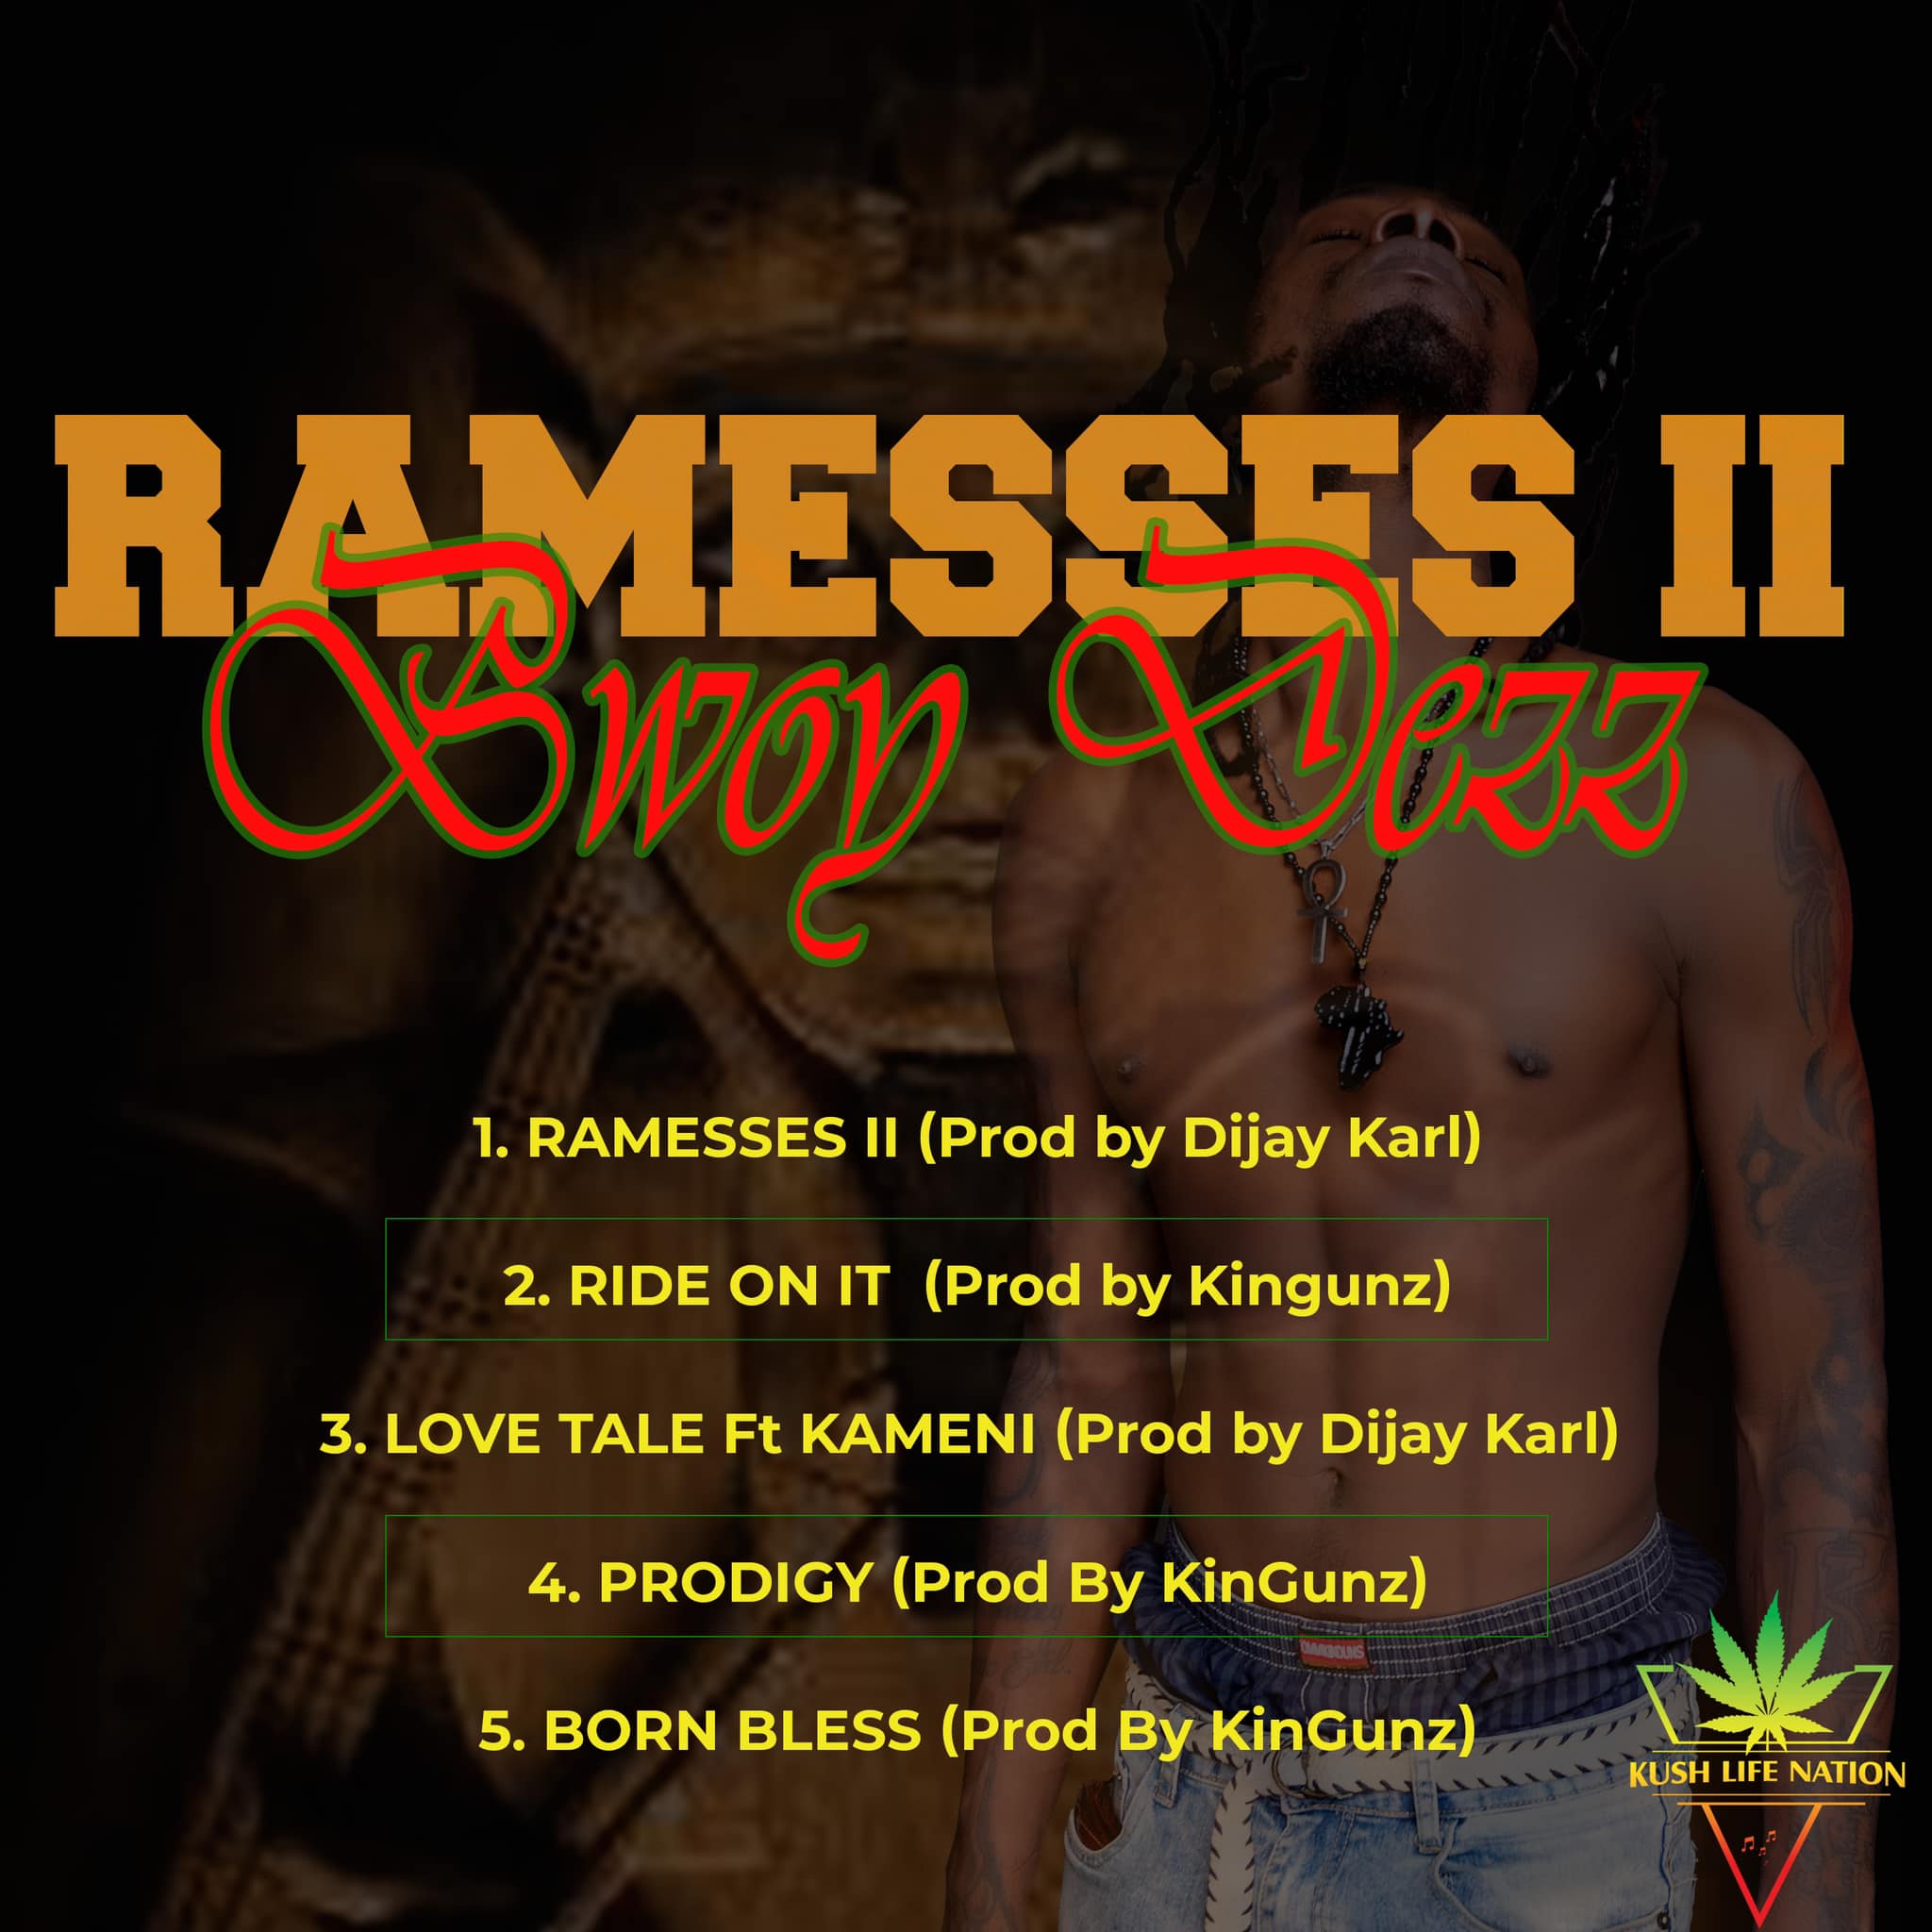 Tracklist Artwork for Ramesses II by Bwoy Dezz